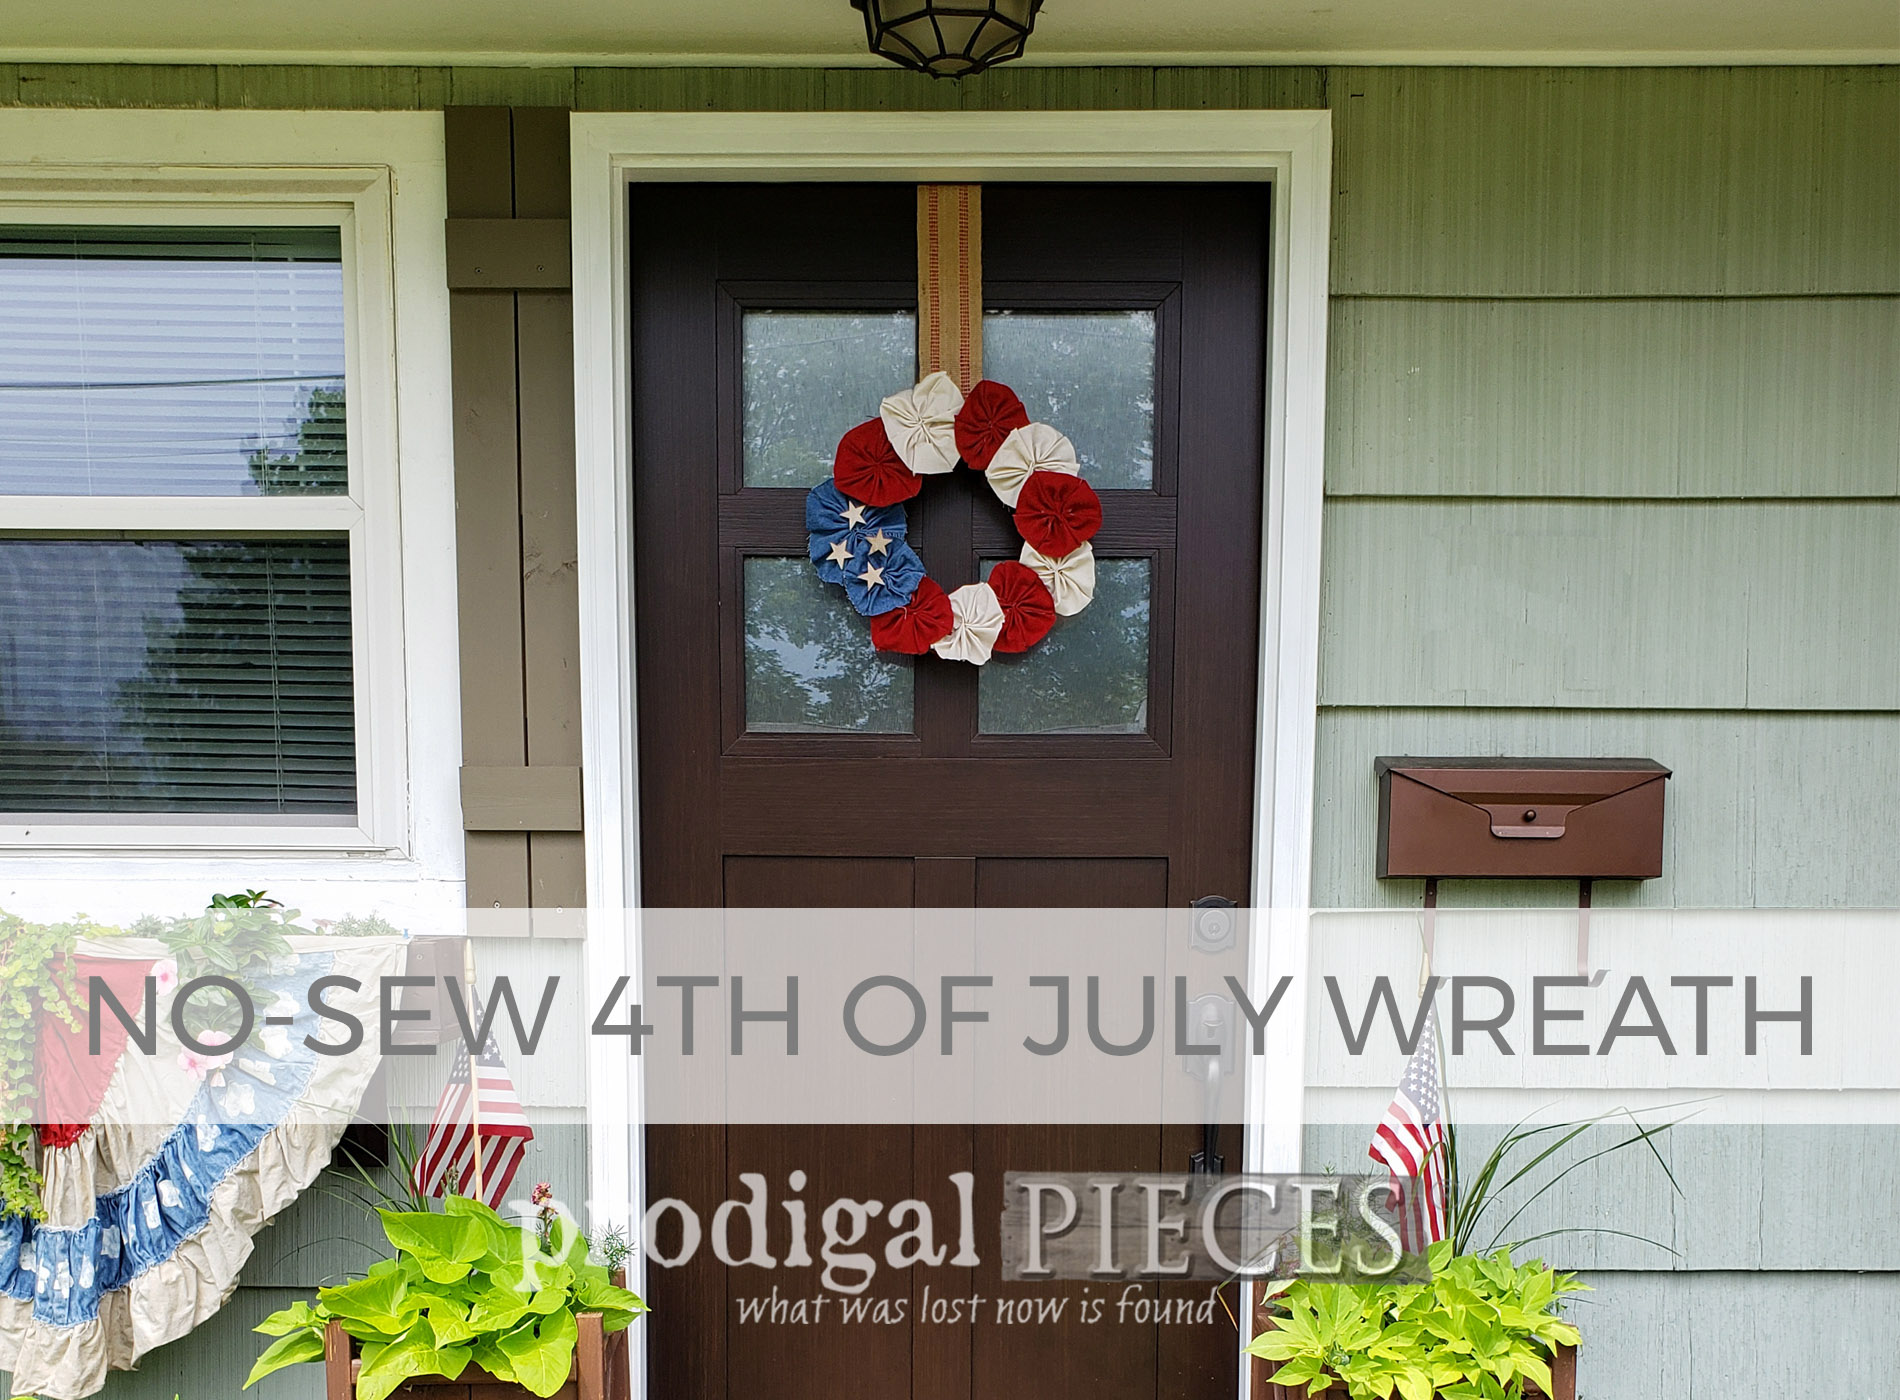 No-Sew 4th of July Wreath by Prodigal Pieces | prodigalpieces.com #prodigalpieces